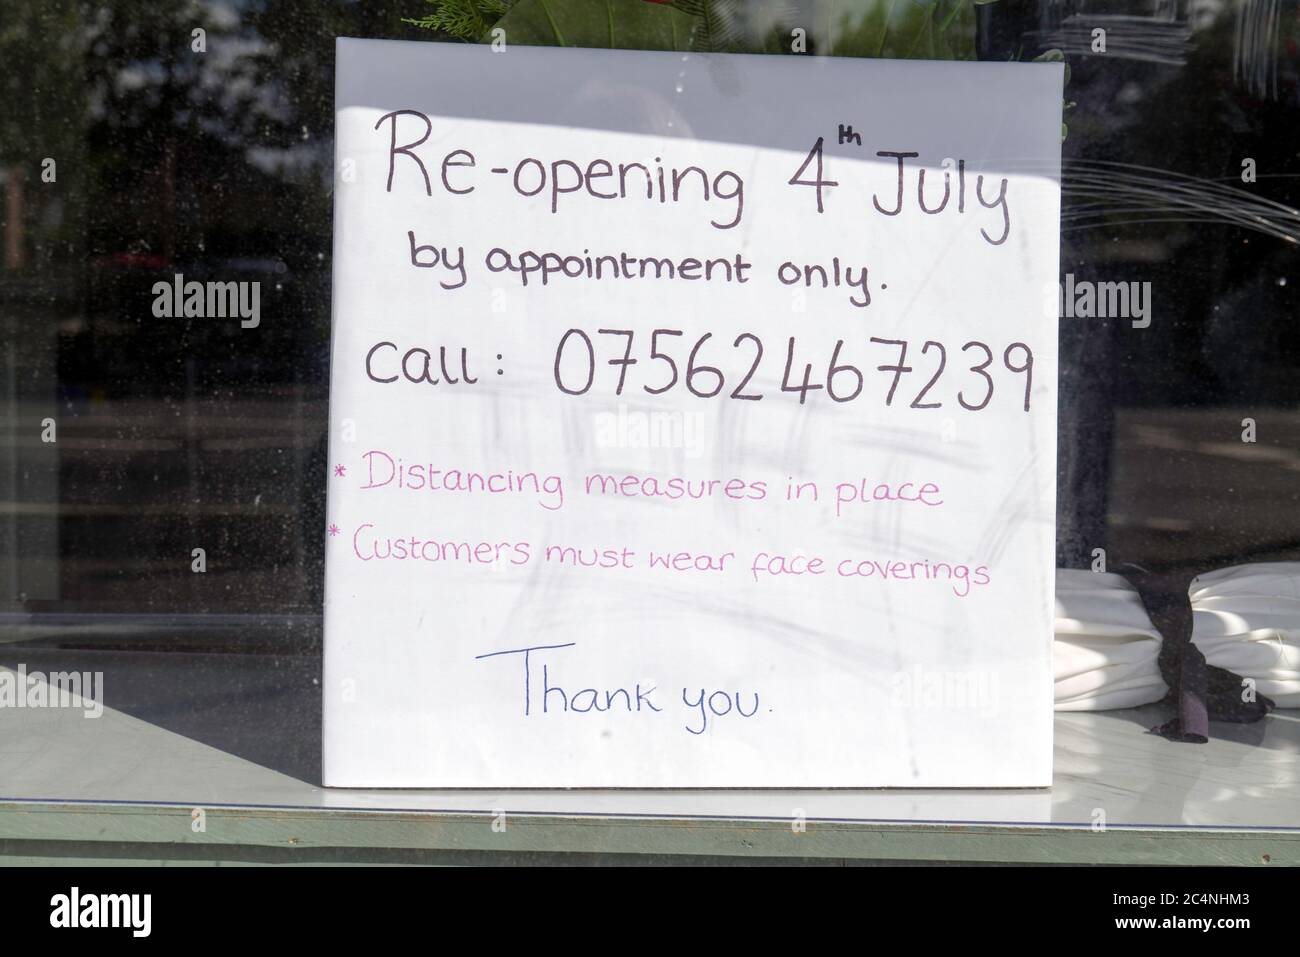 A sign in a hairdressers shop advertising appointments only from the 4th July 2020. Stock Photo